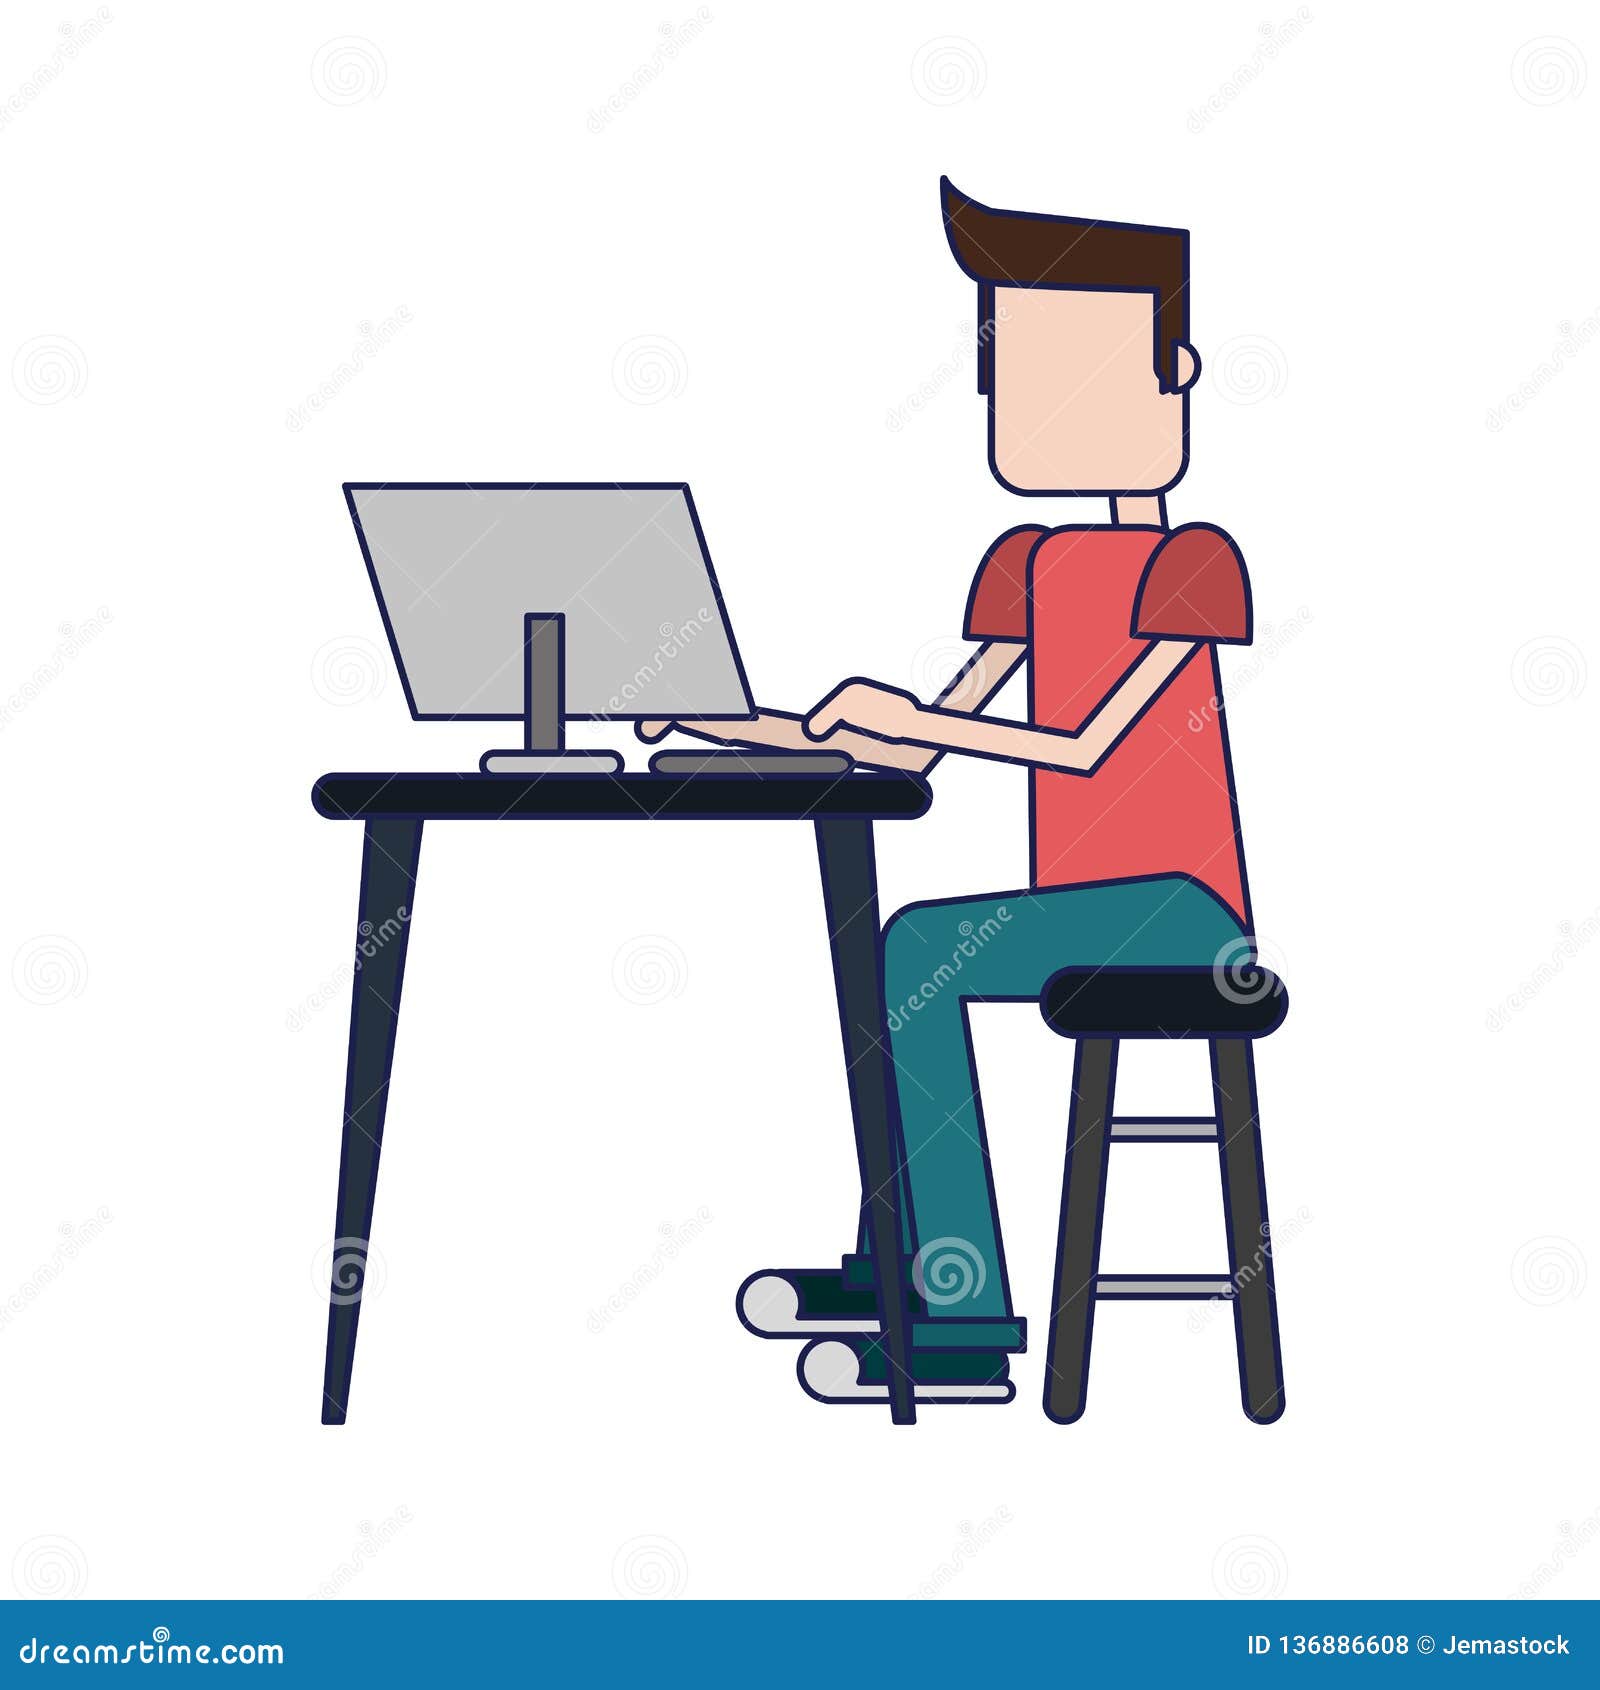 Student with computer stock vector. Illustration of cartoon - 136886608